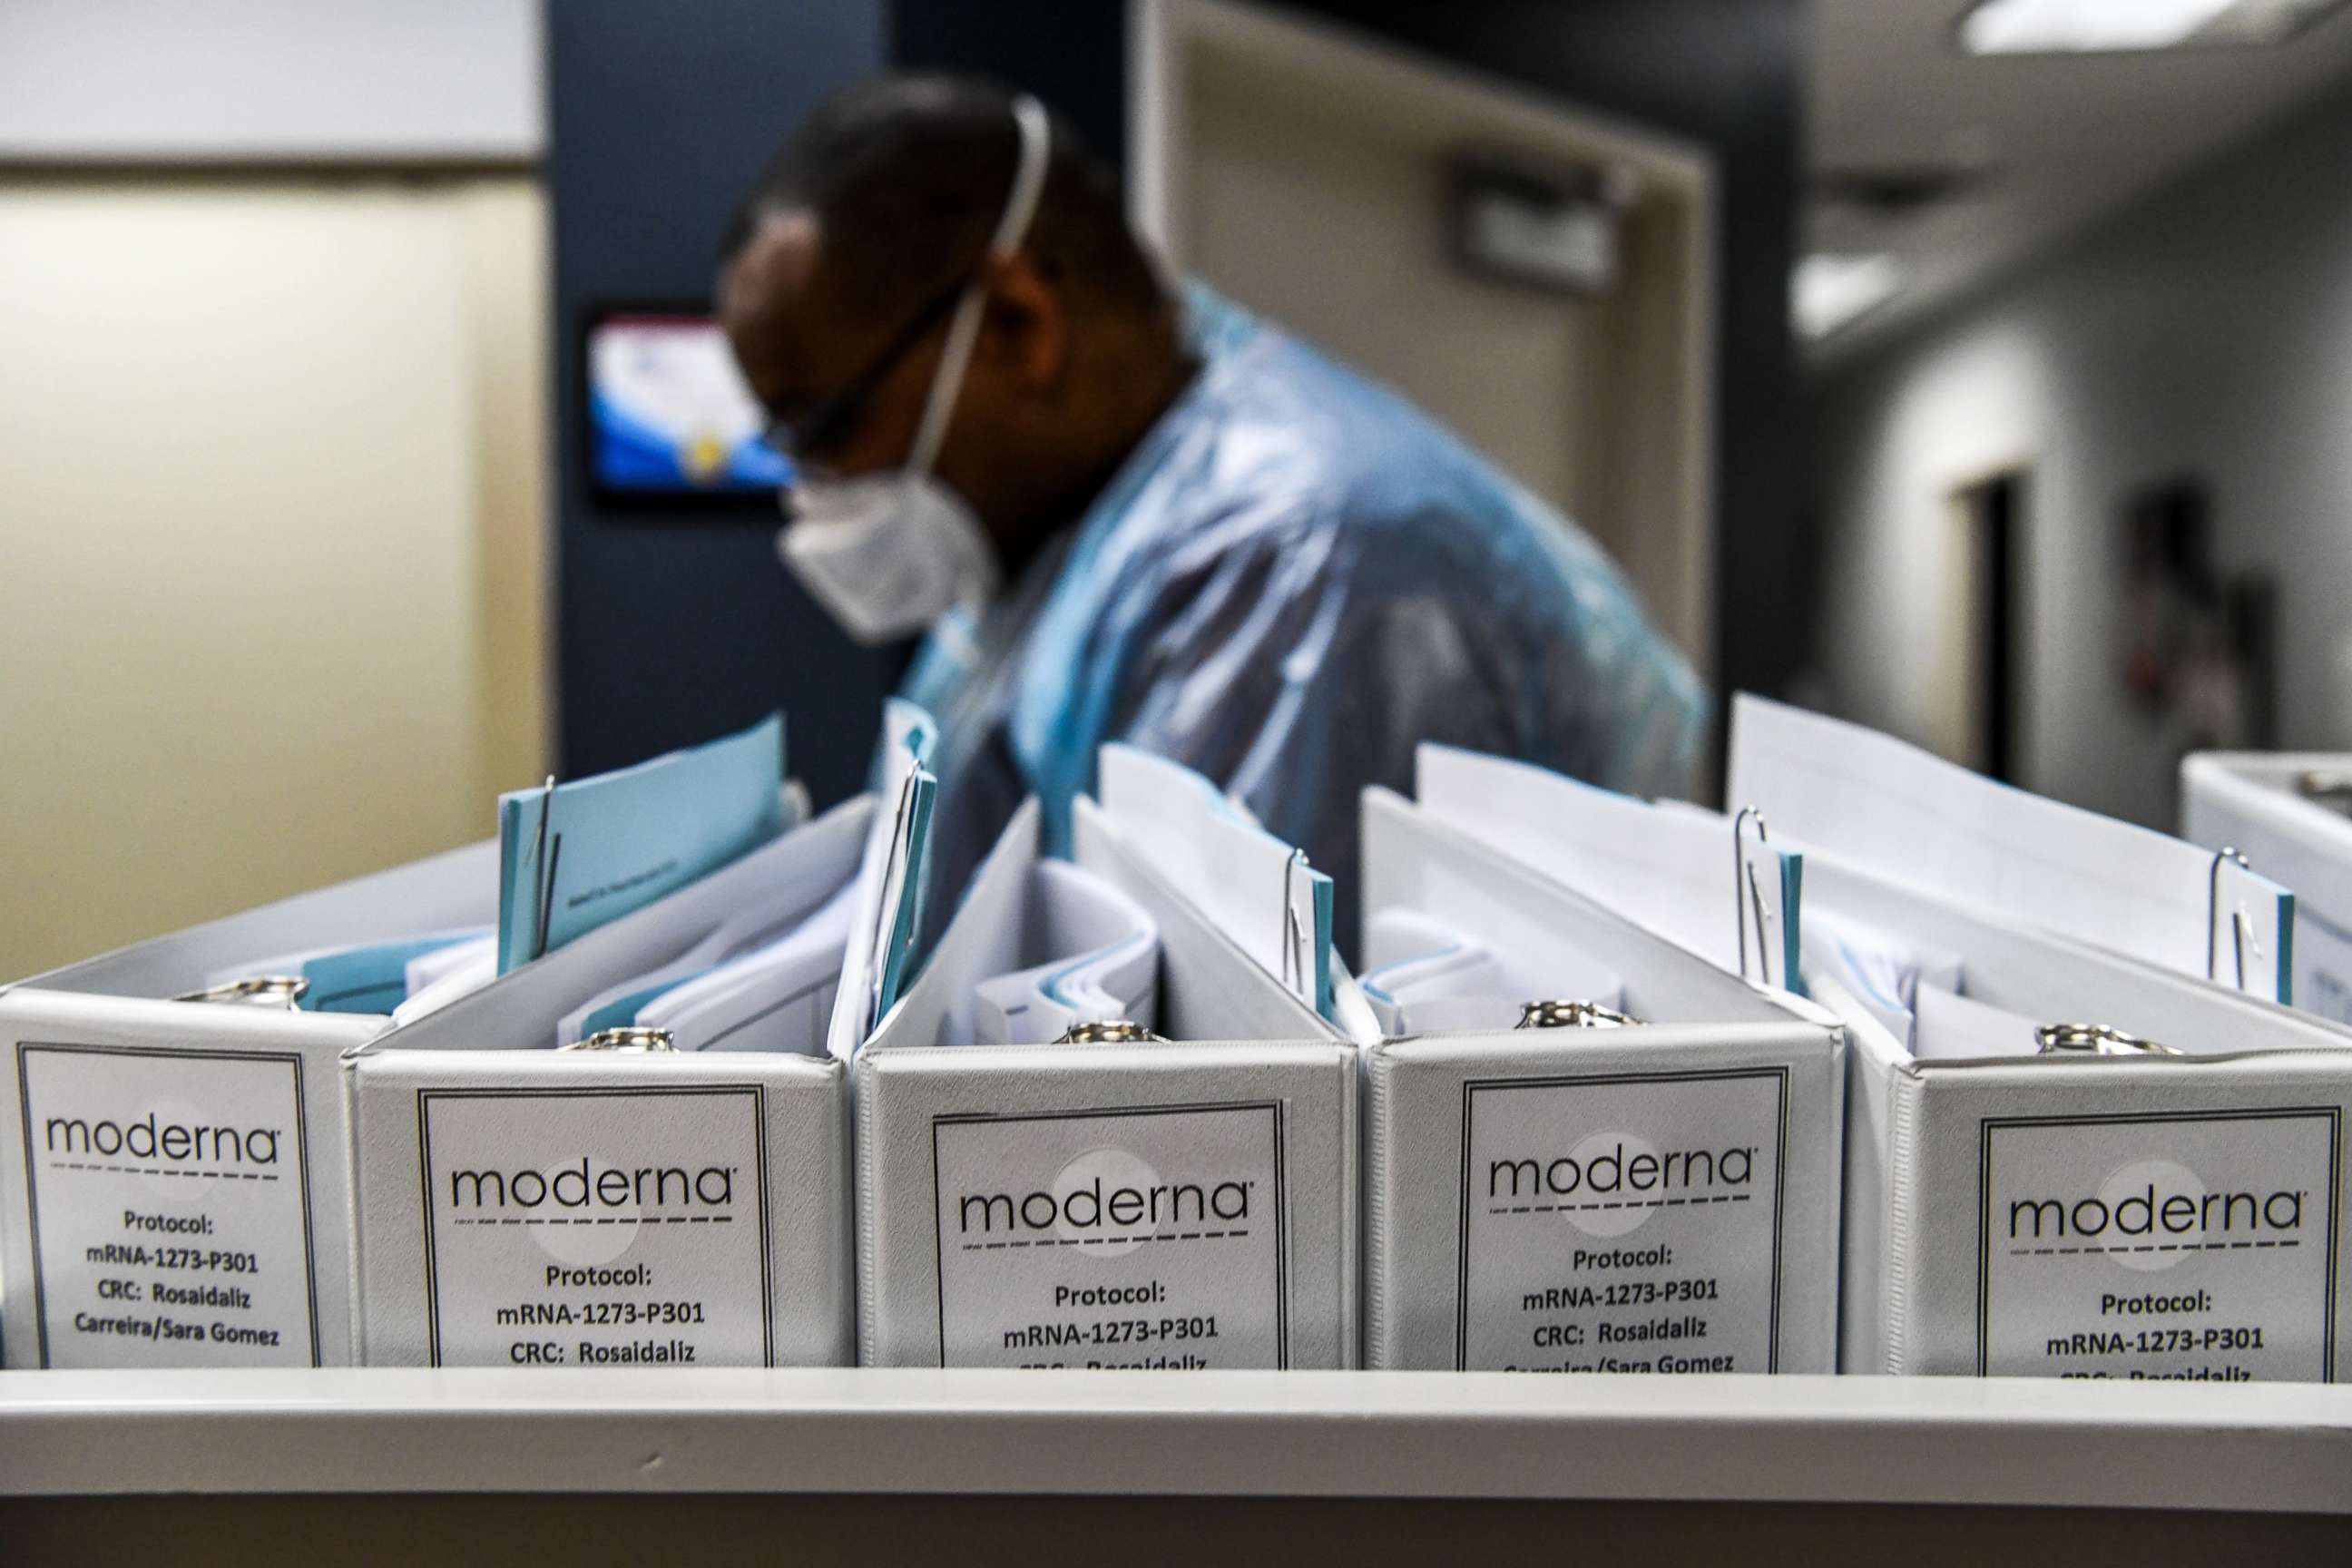 PHOTO: (FILES) In this file photo taken on August 13, 2020 Biotechnology company Moderna protocol files for COVID-19 vaccinations are kept at the Research Centers of America in Hollywood, Florida.